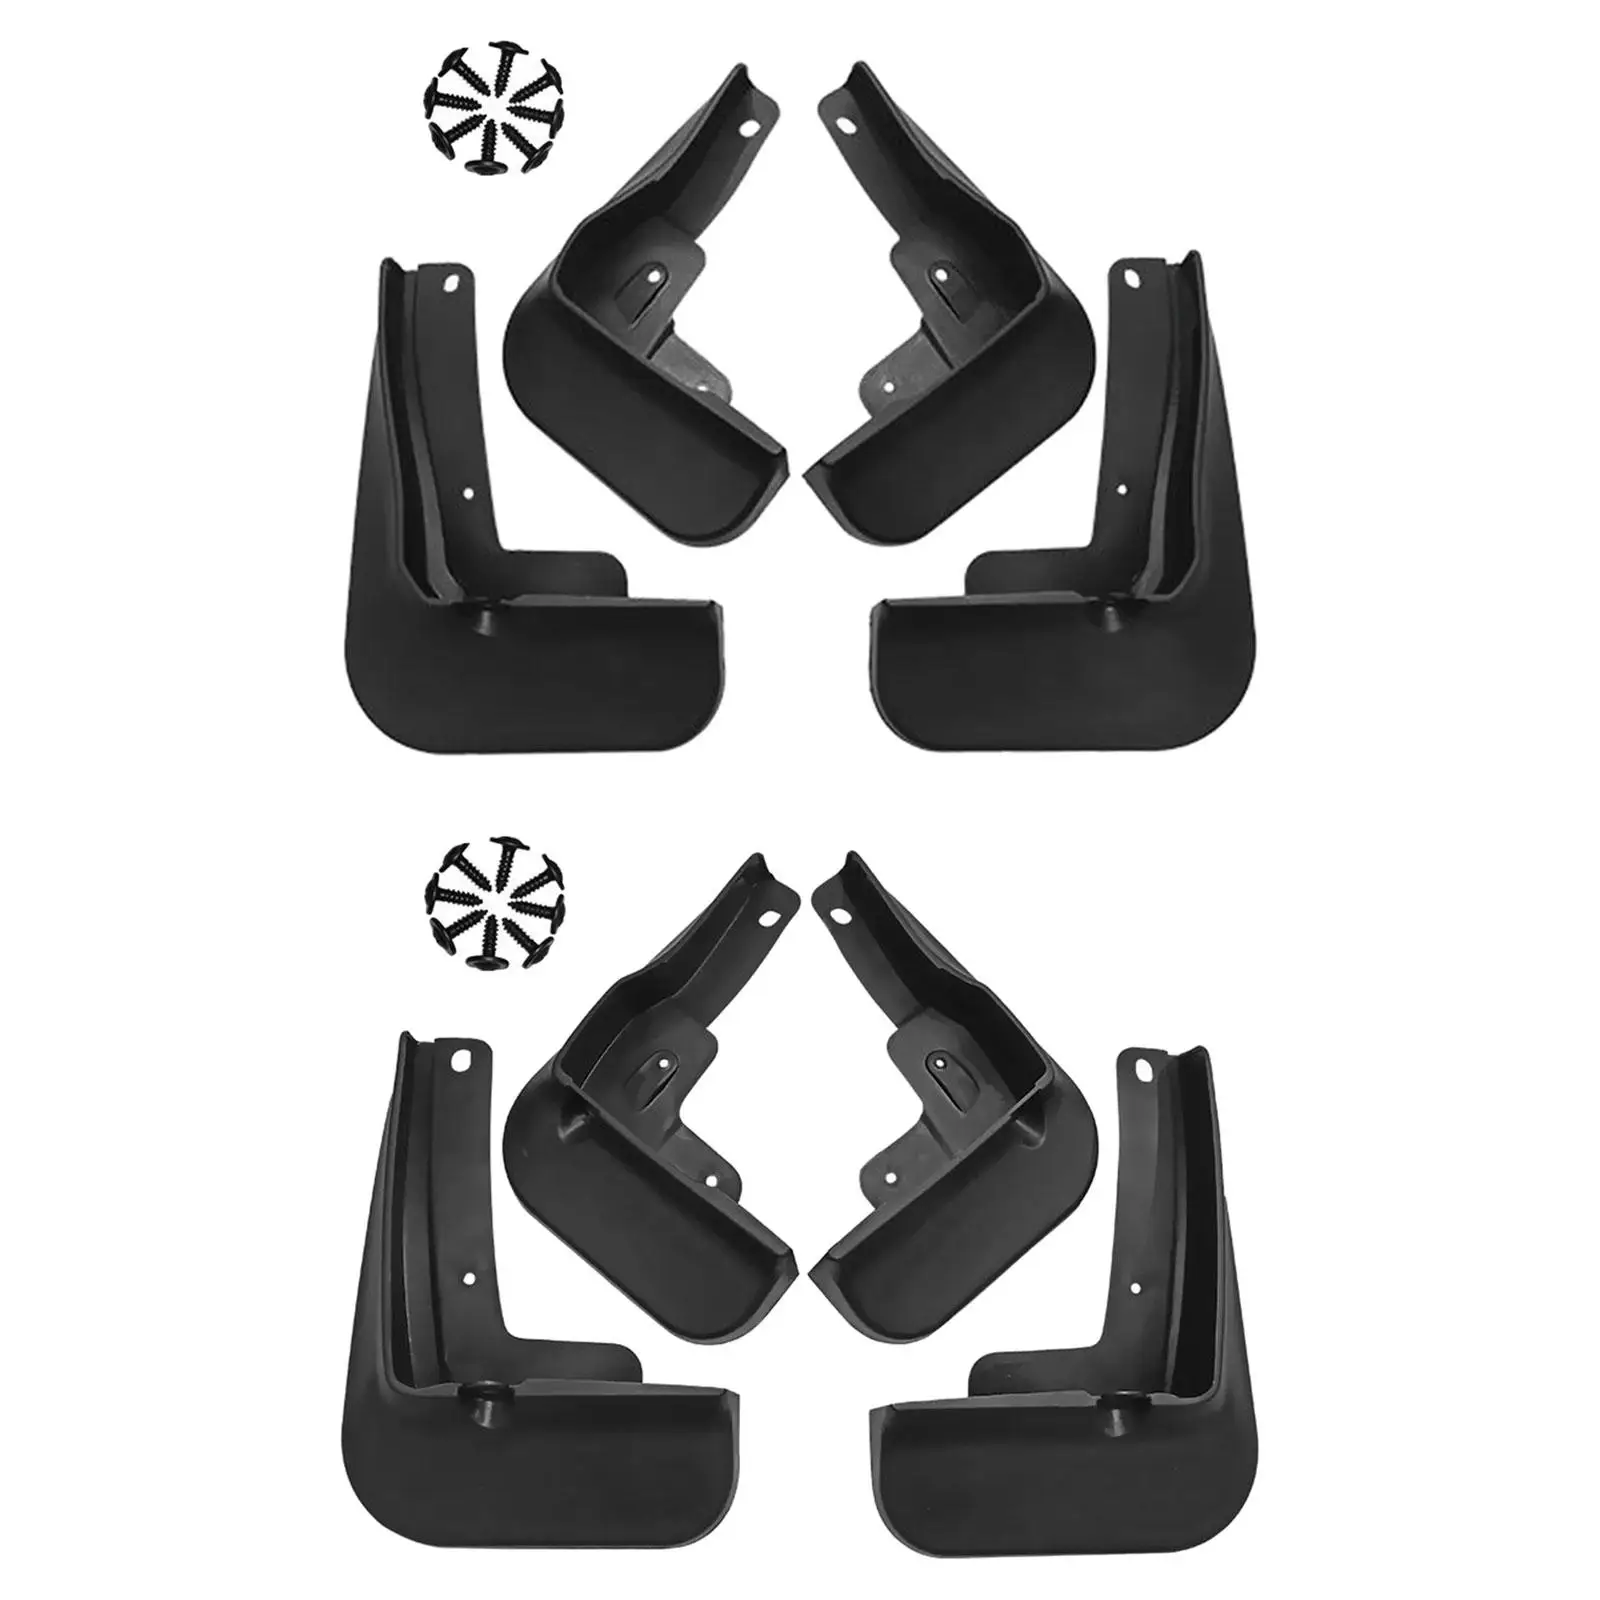 4Pcs Car Mud Flaps Protection Mudflaps for toyota for camry Car Accessories